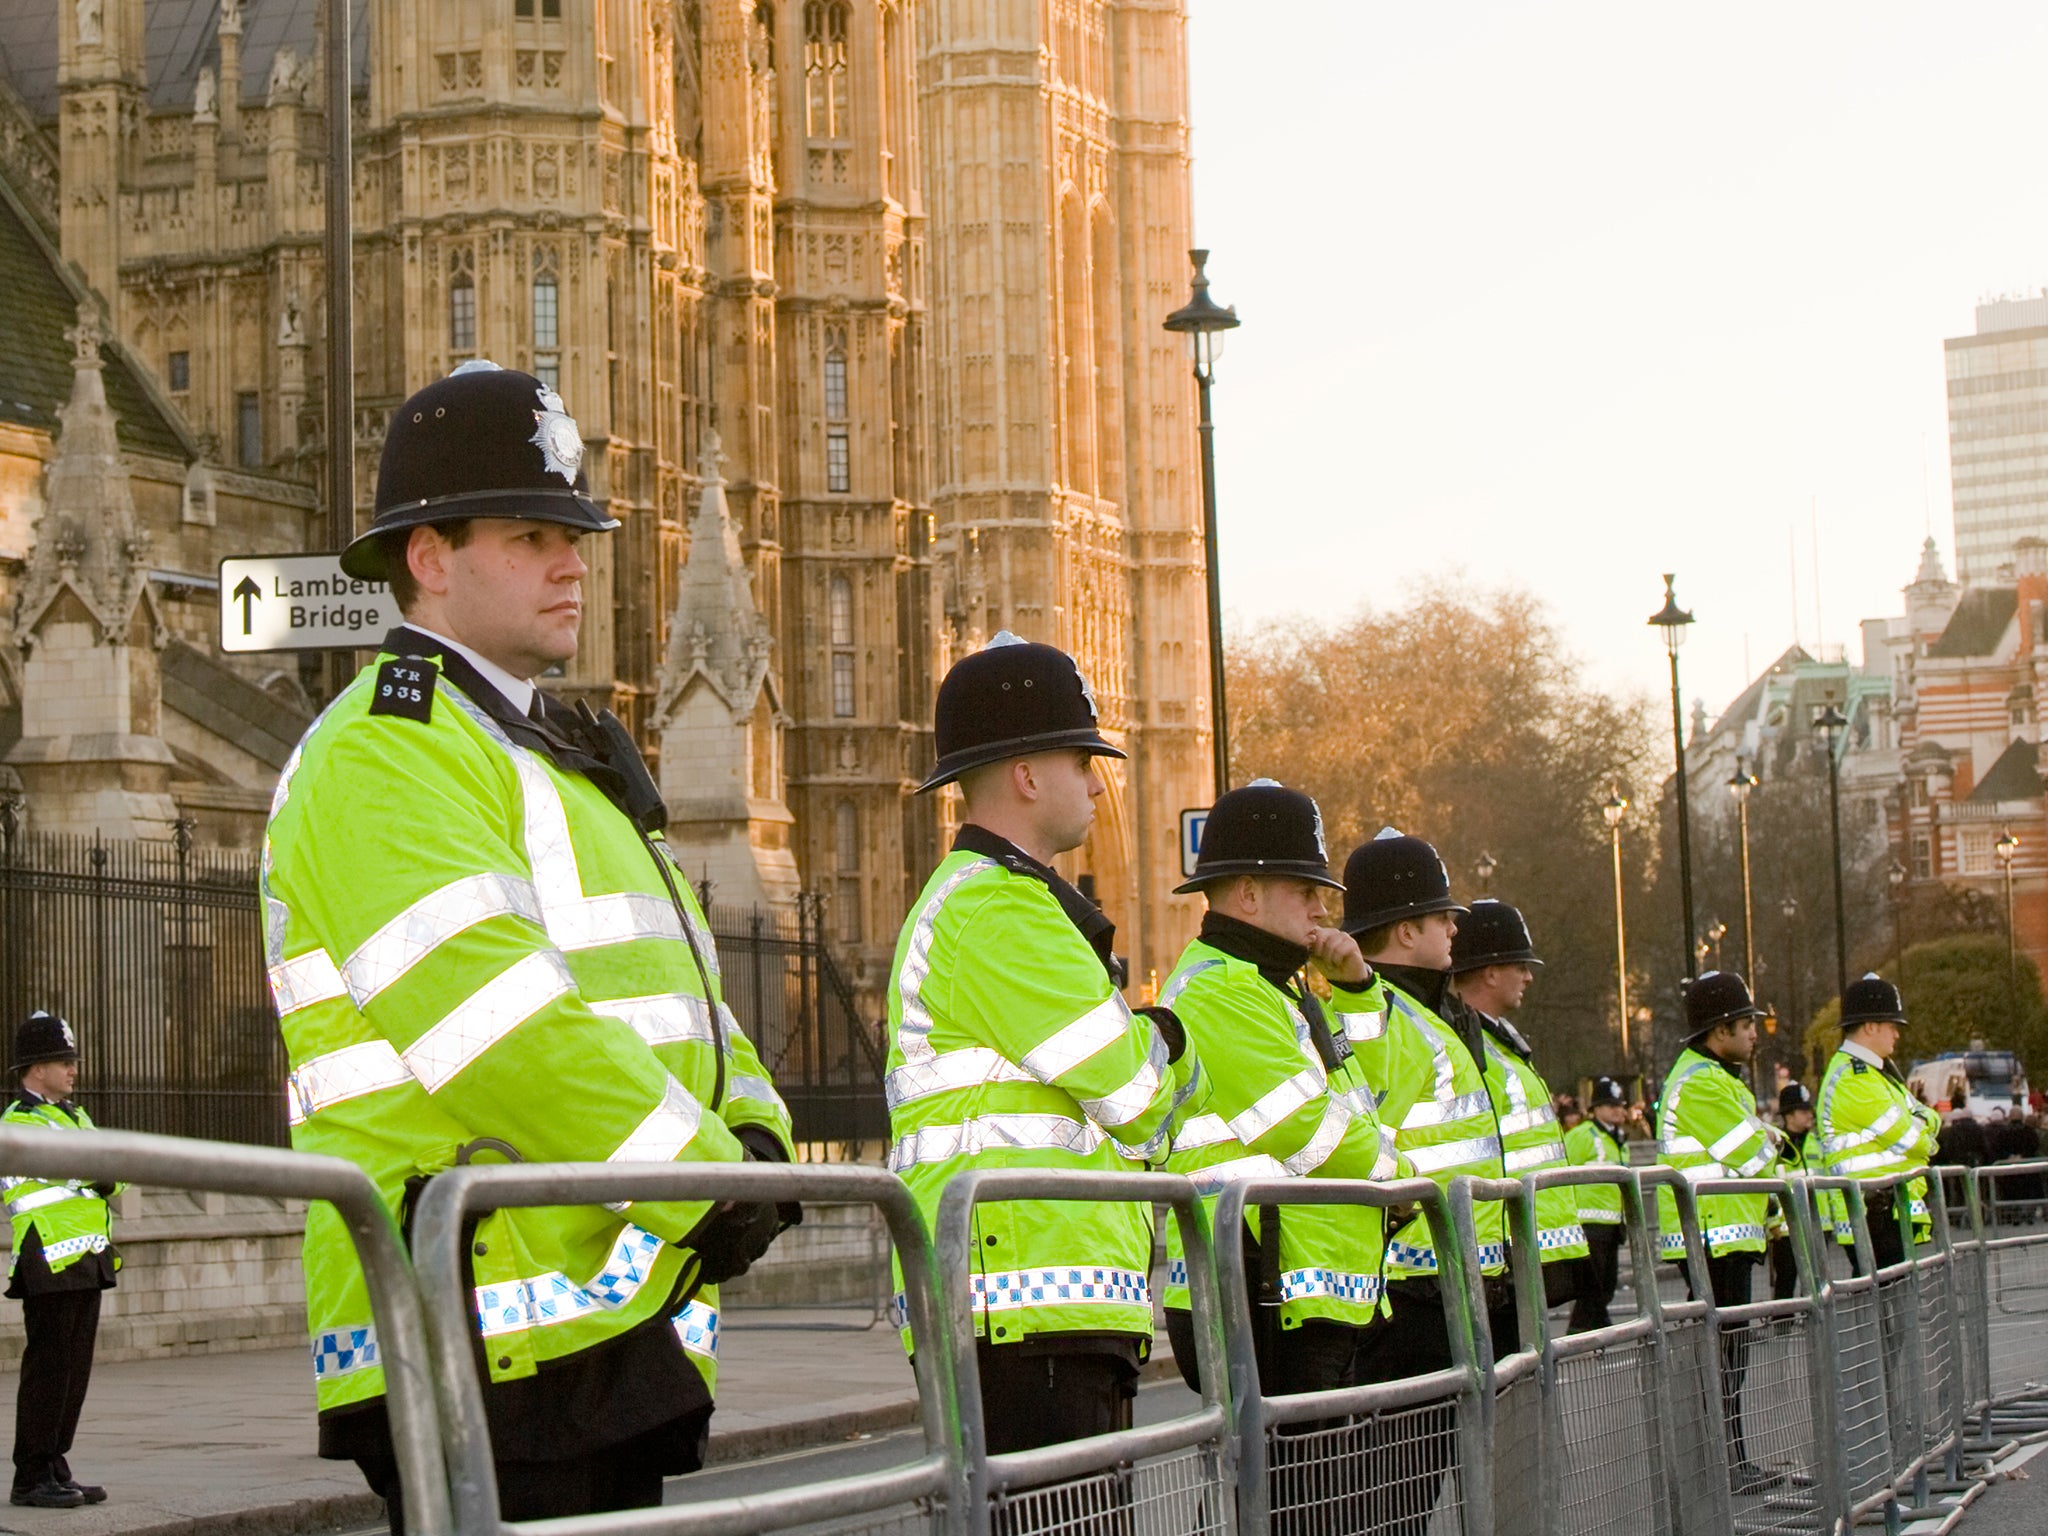 Police commissioners are warning that police services in Britain face a “milestone moment”, with government spending decisions in the coming months set to shape policing “for a generation”